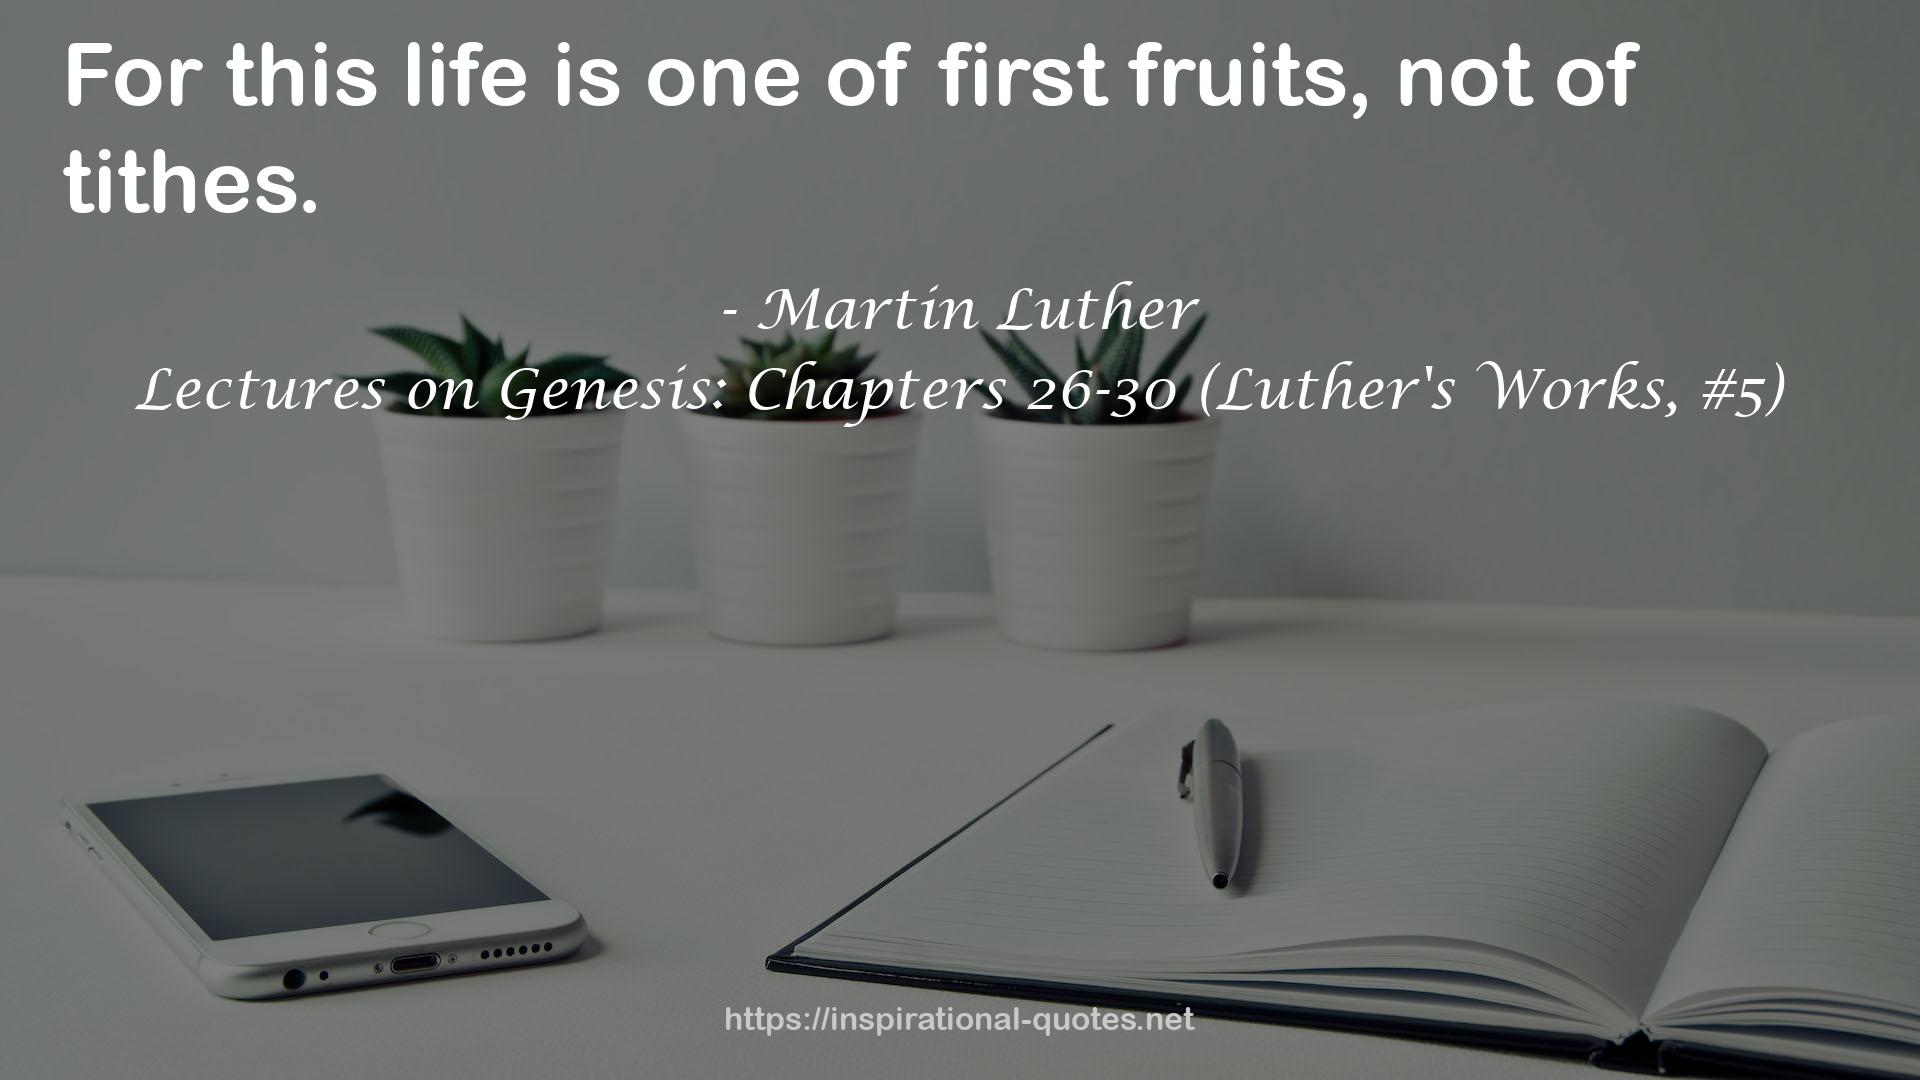 Lectures on Genesis: Chapters 26-30 (Luther's Works, #5) QUOTES